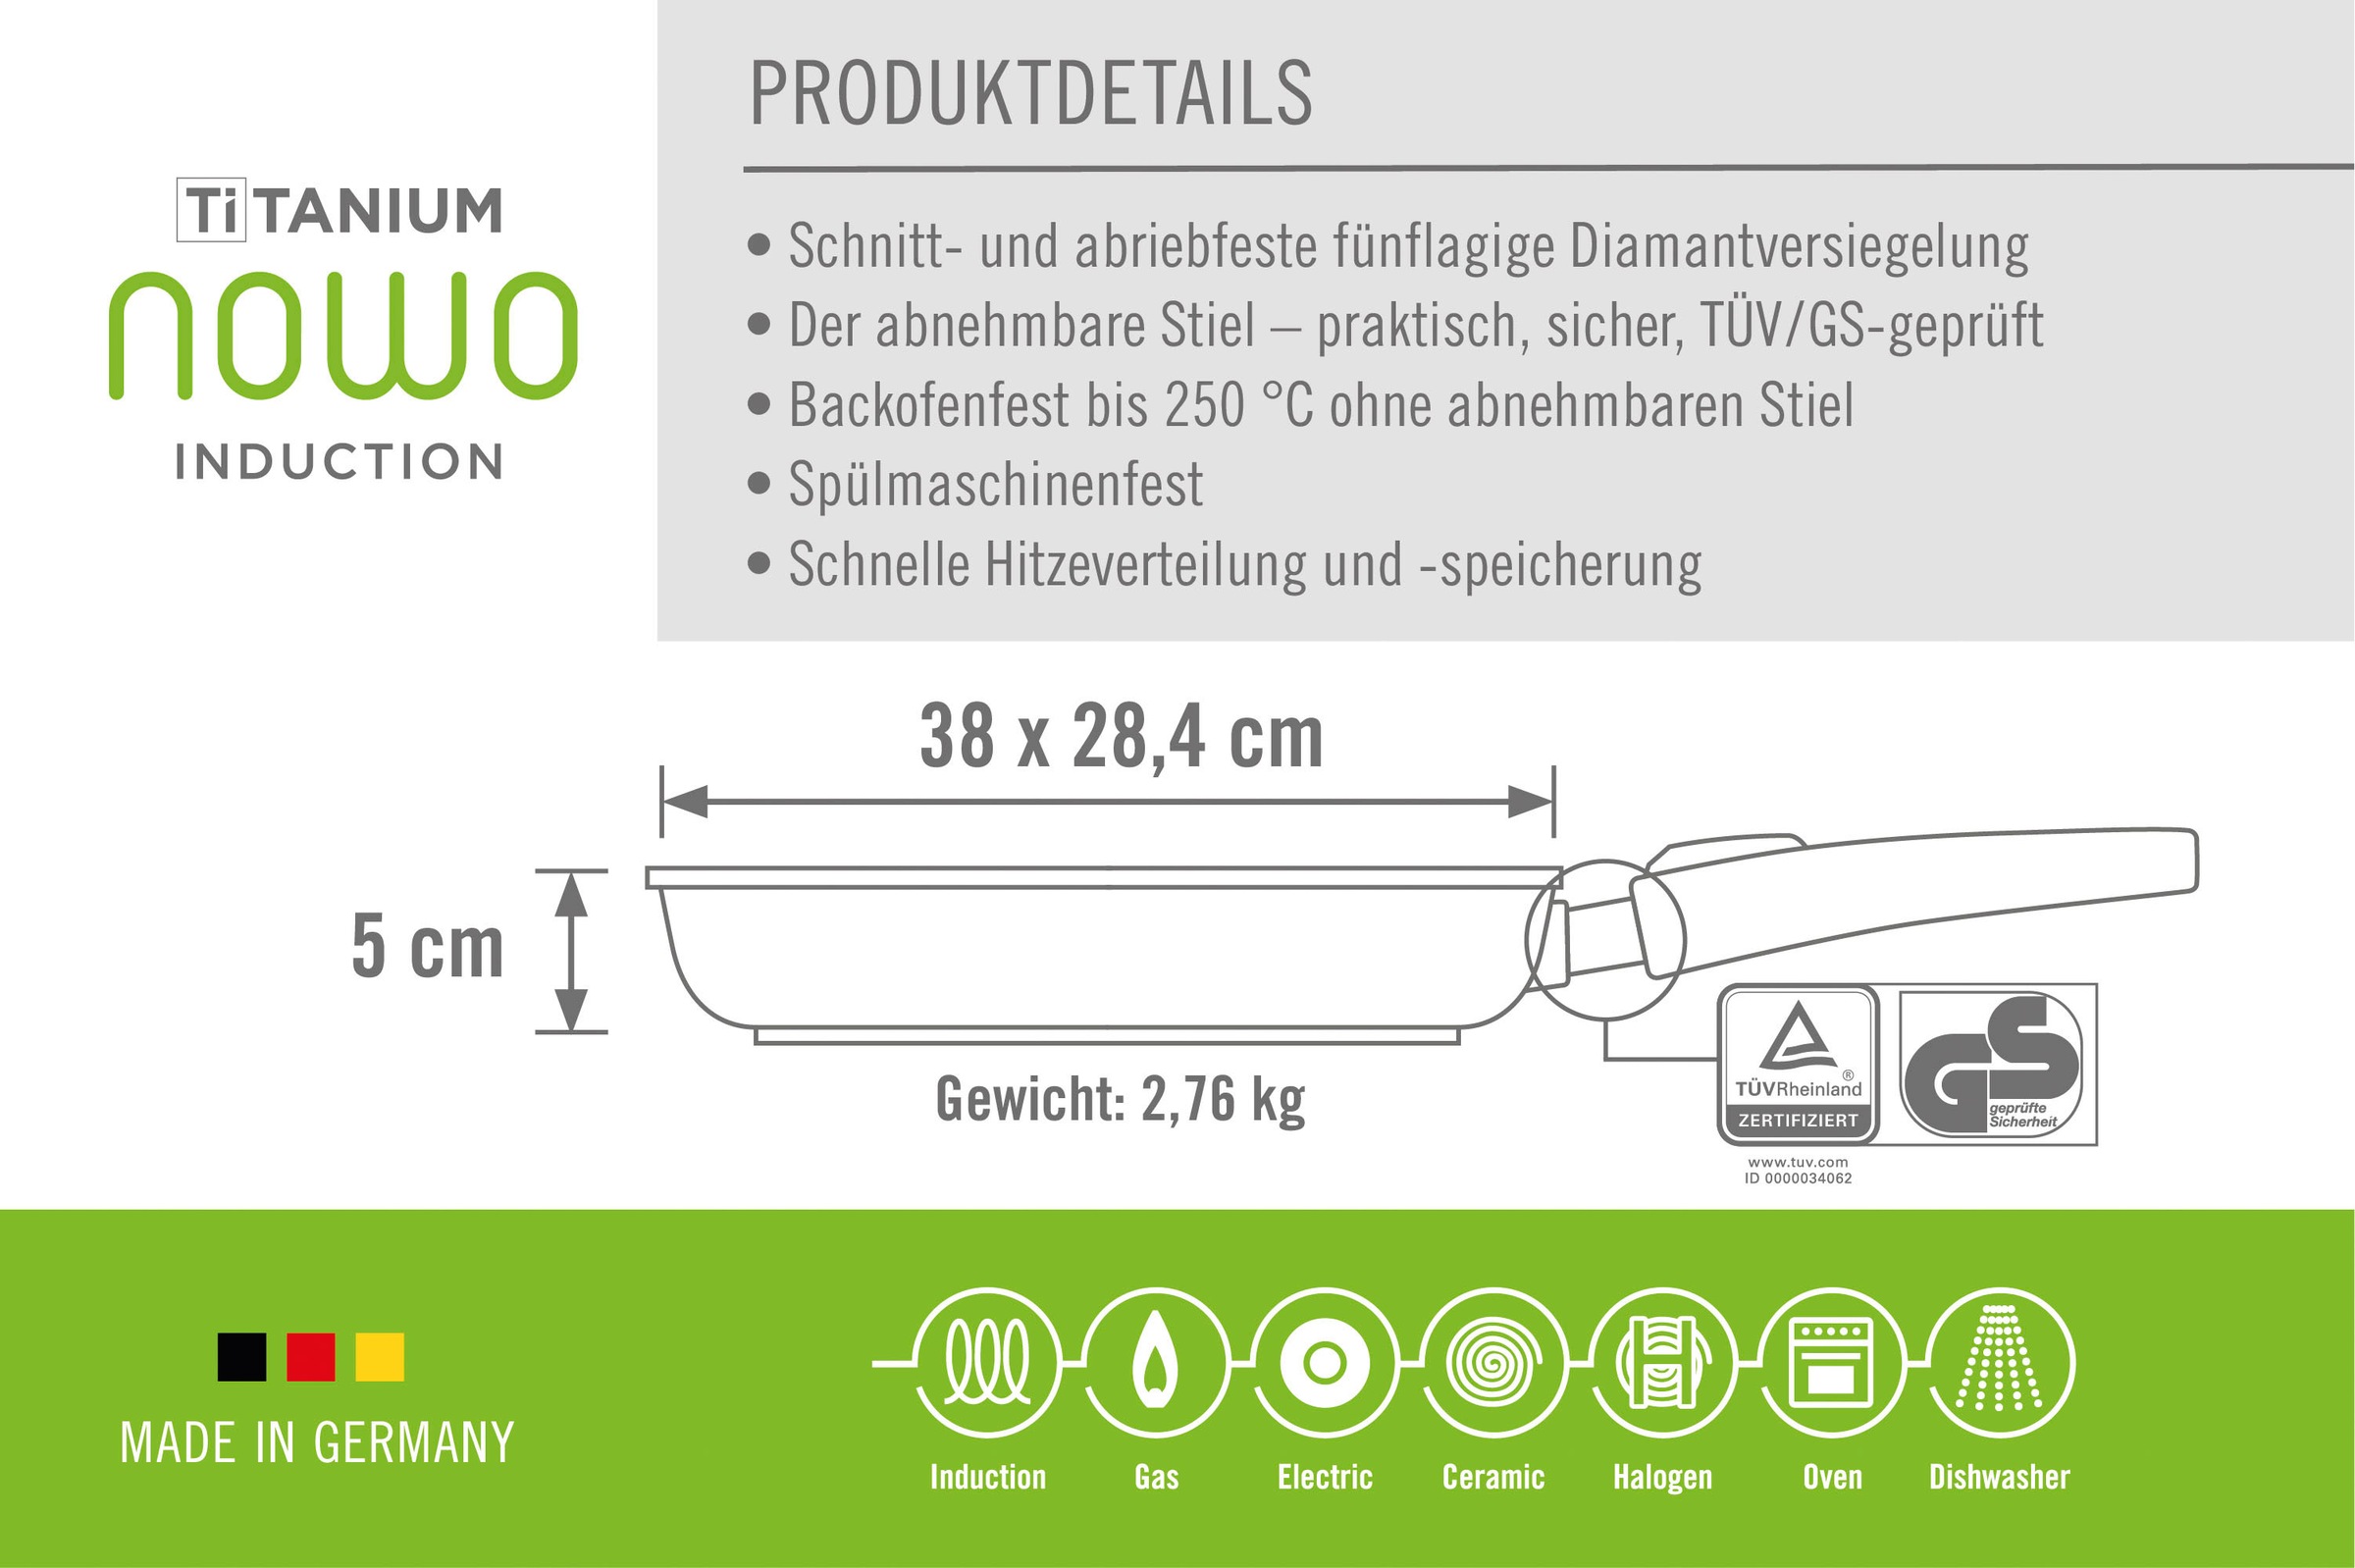 WOLL MADE IN GERMANY Fischpfanne »Nowo Titanium«, Aluminiumguss, (1 tlg.), Induktion, Made in Germany